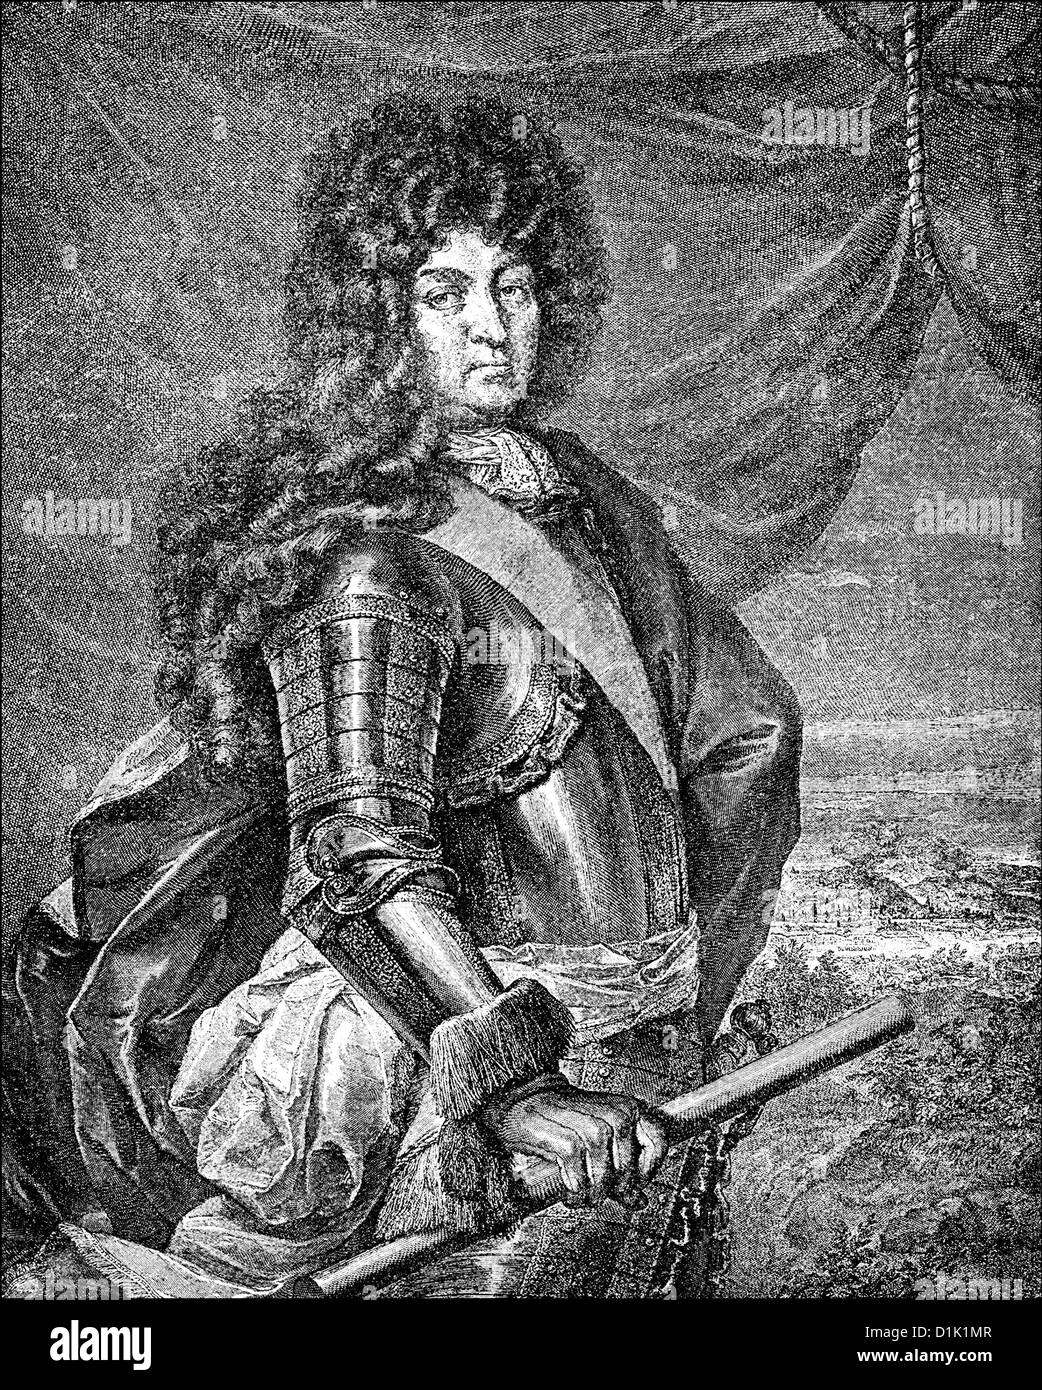 Louis XIV, Louis le Grand, 1638 - 1715, King of France and Navarre, called the Sun King or le Roi-Soleil, Stock Photo